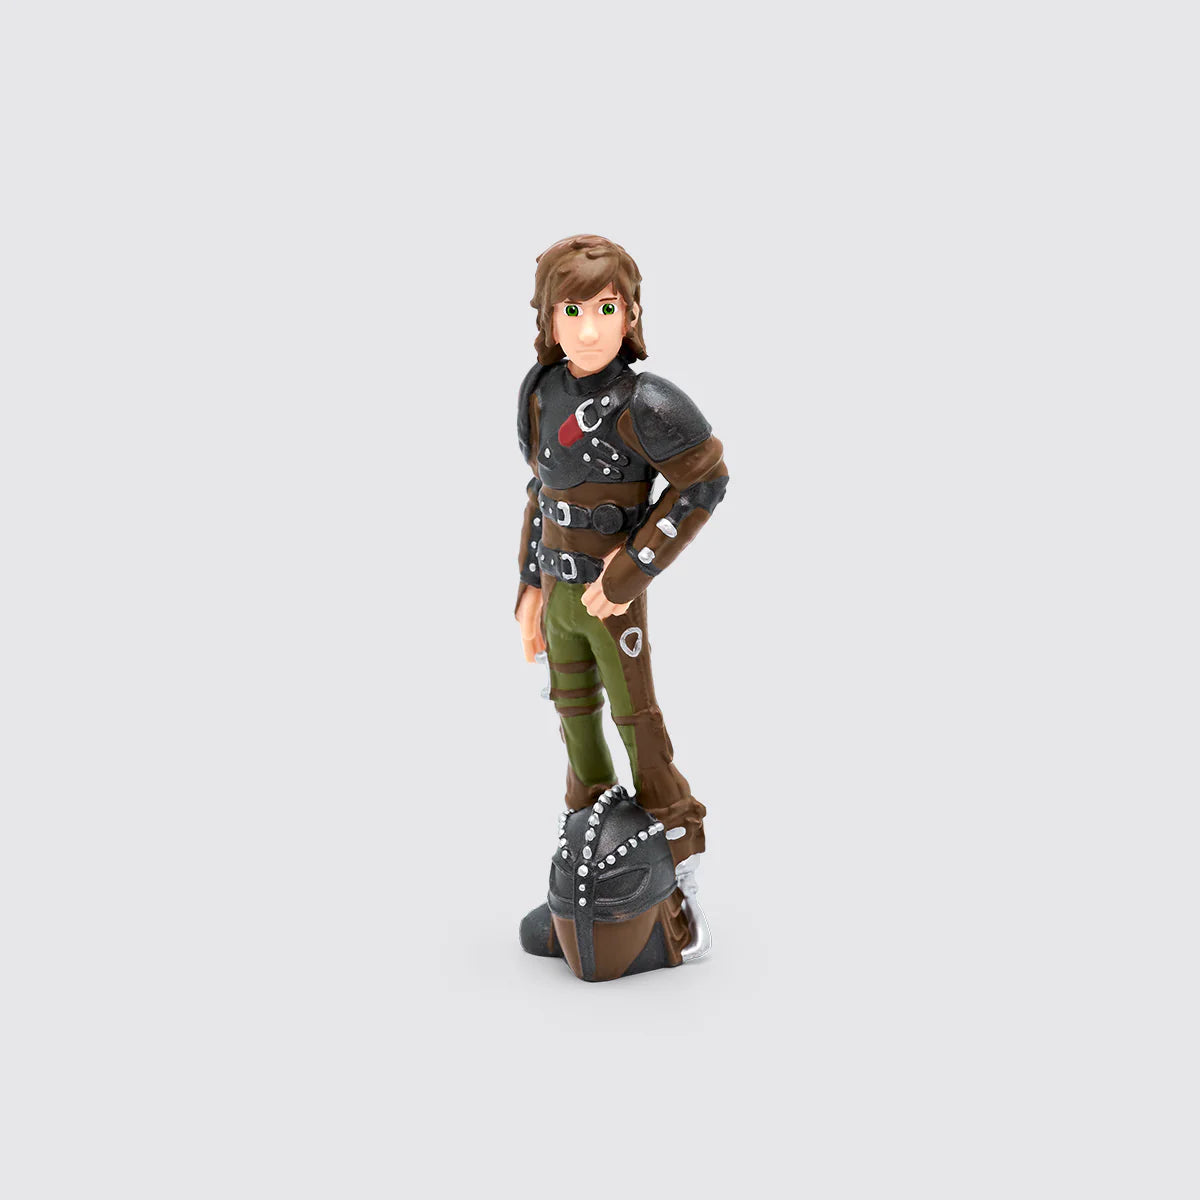 Tonies-Tonies Characters - How to Train Your Dragon-10000570-Legacy Toys